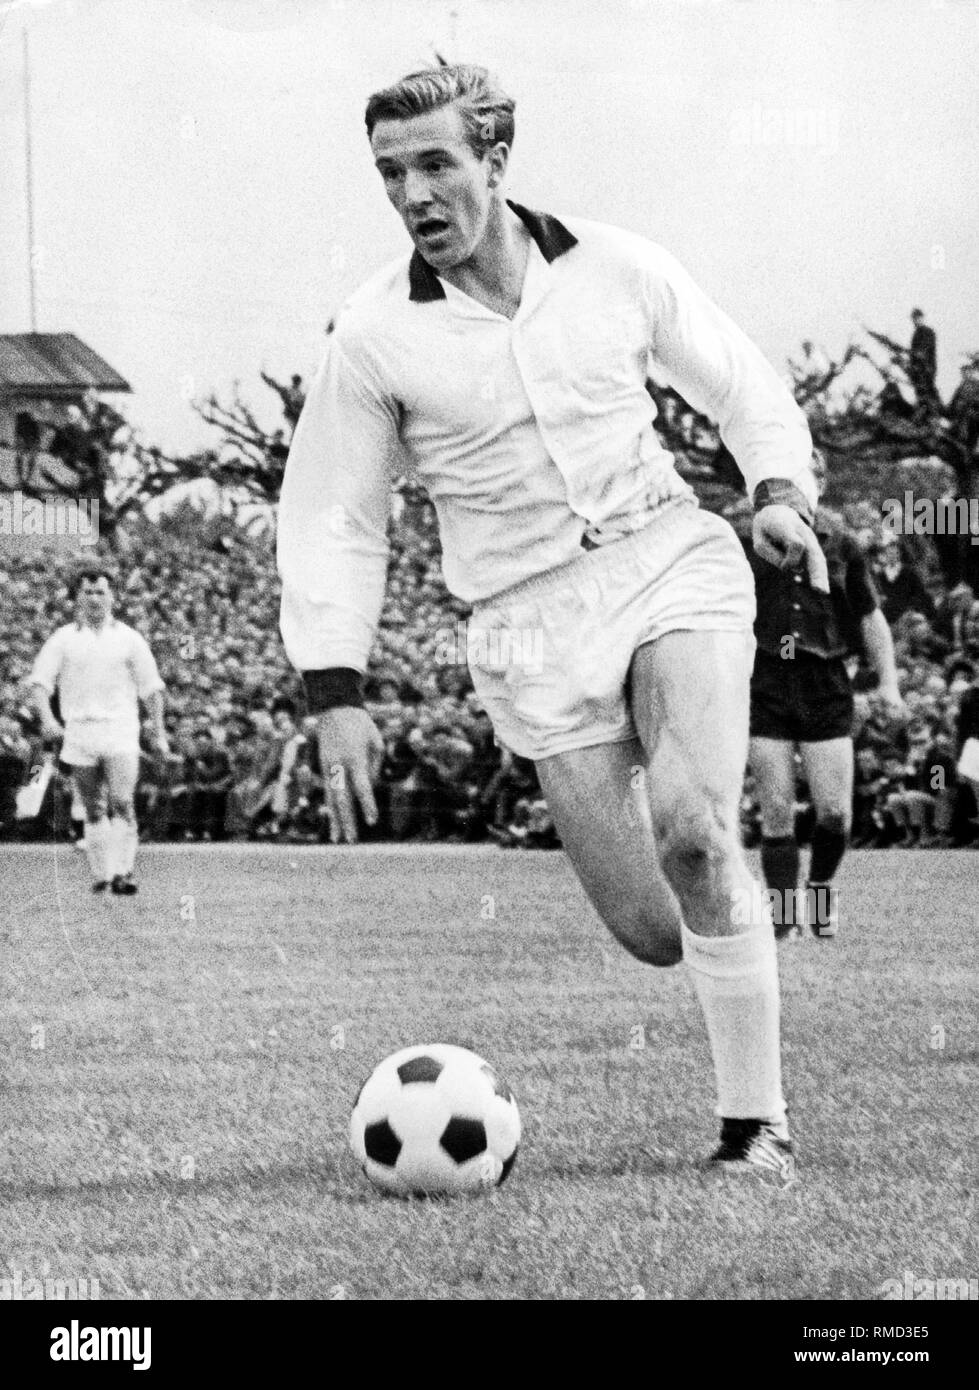 Guenter Netzer (born 1944), a German football player. Portrait on the pitch in a jersey of Borussia Moenchengladbach (1963-73).  He was voted Footballer of the Year in Germany (1972, 73). Stock Photo